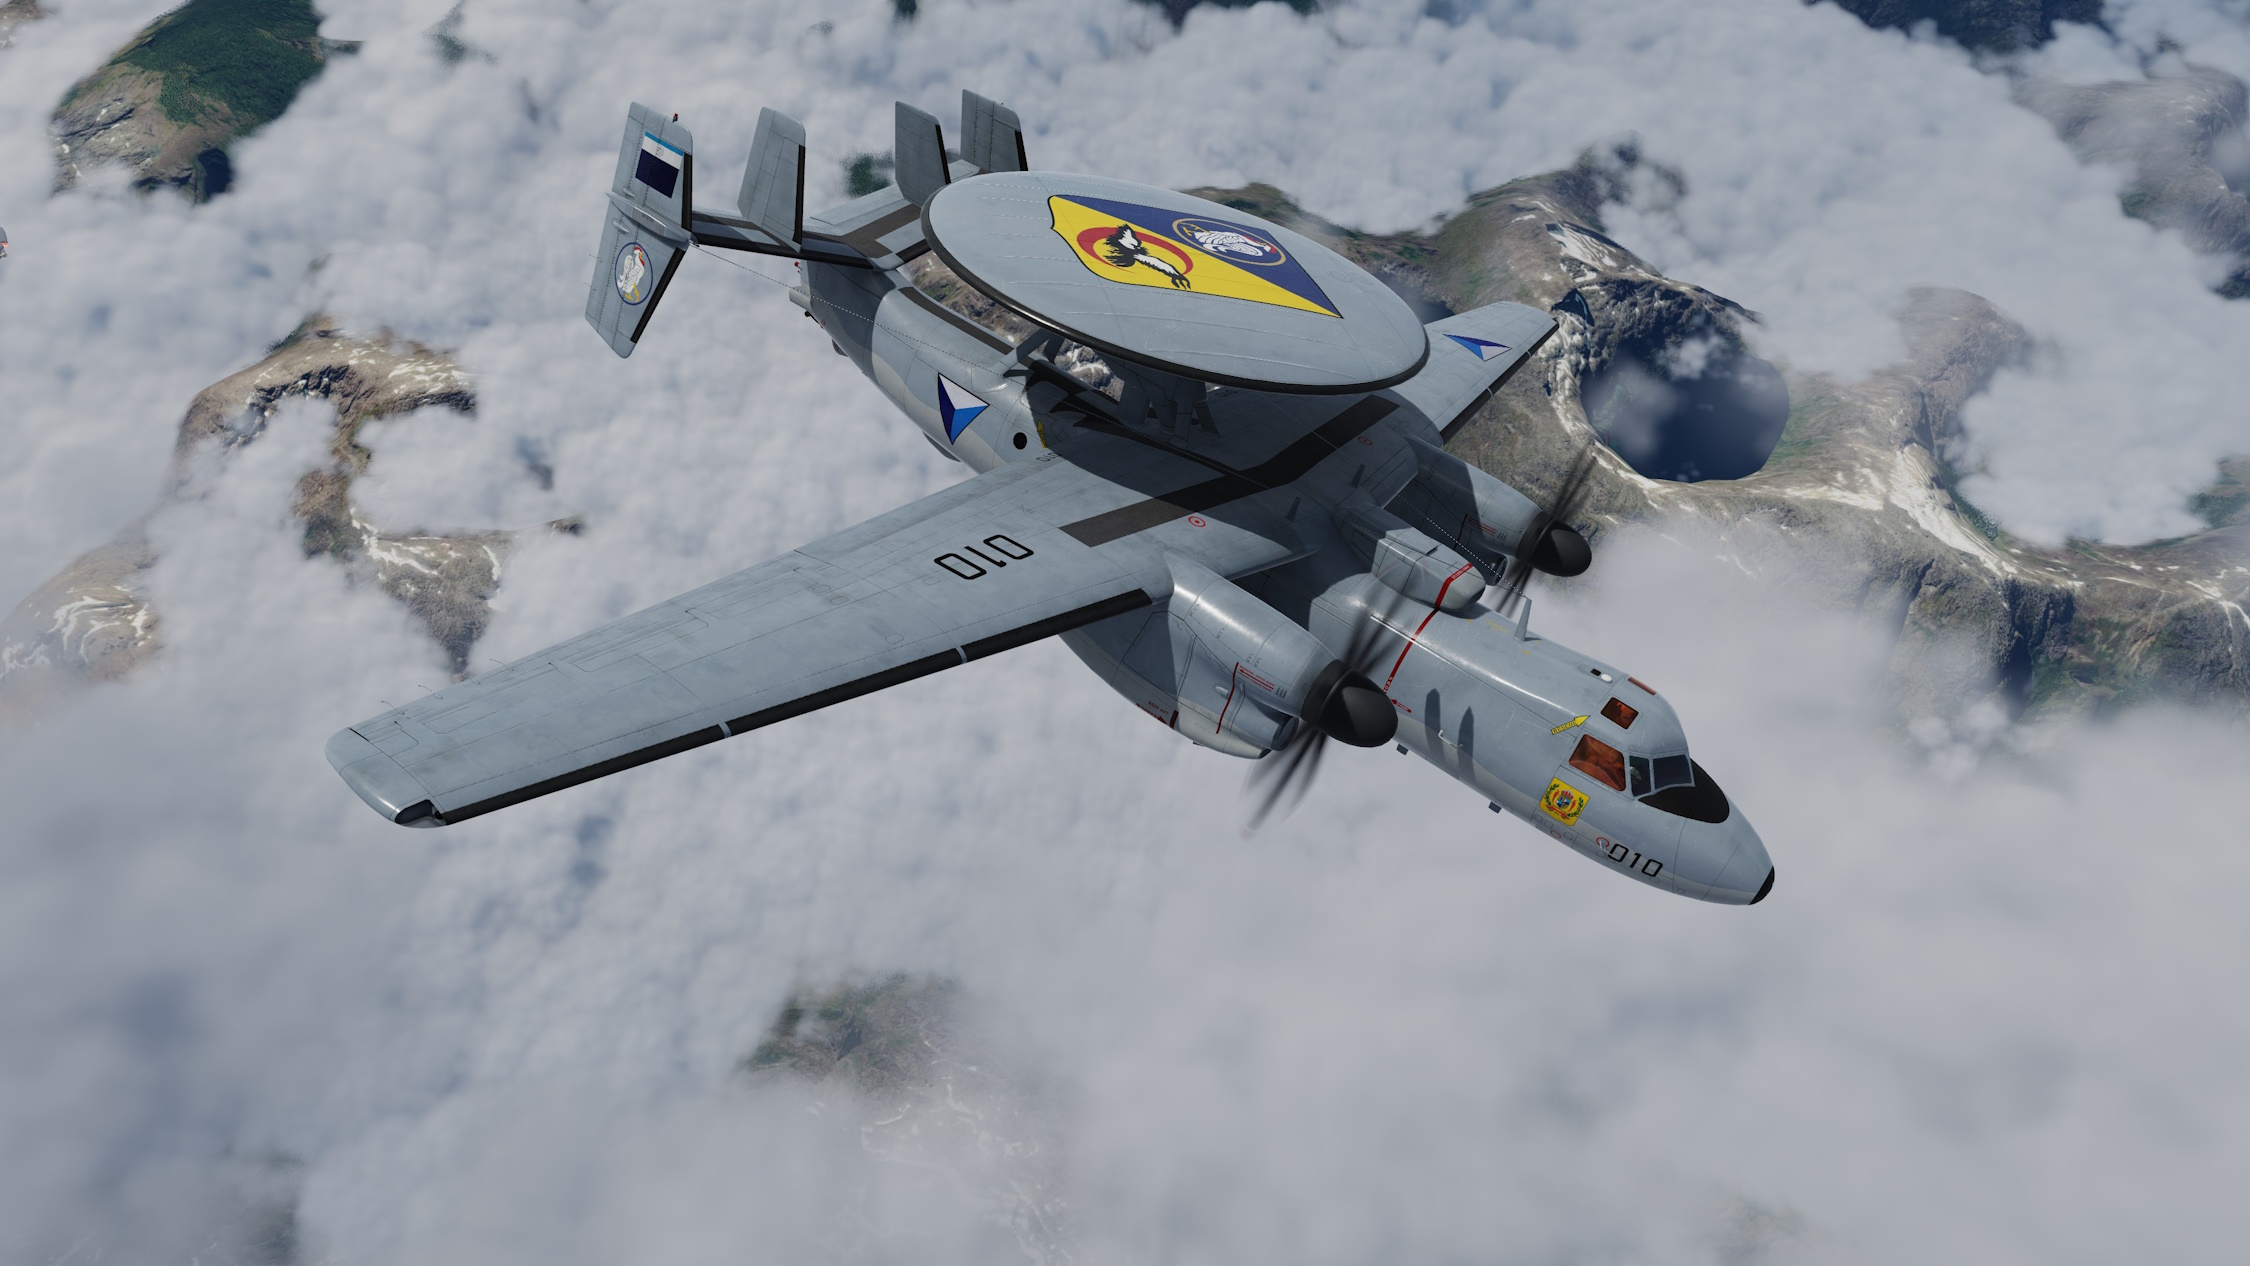 ACE COMBAT - E-2 - Nordennavic Royal Air Force - Sqn "Berry" Early